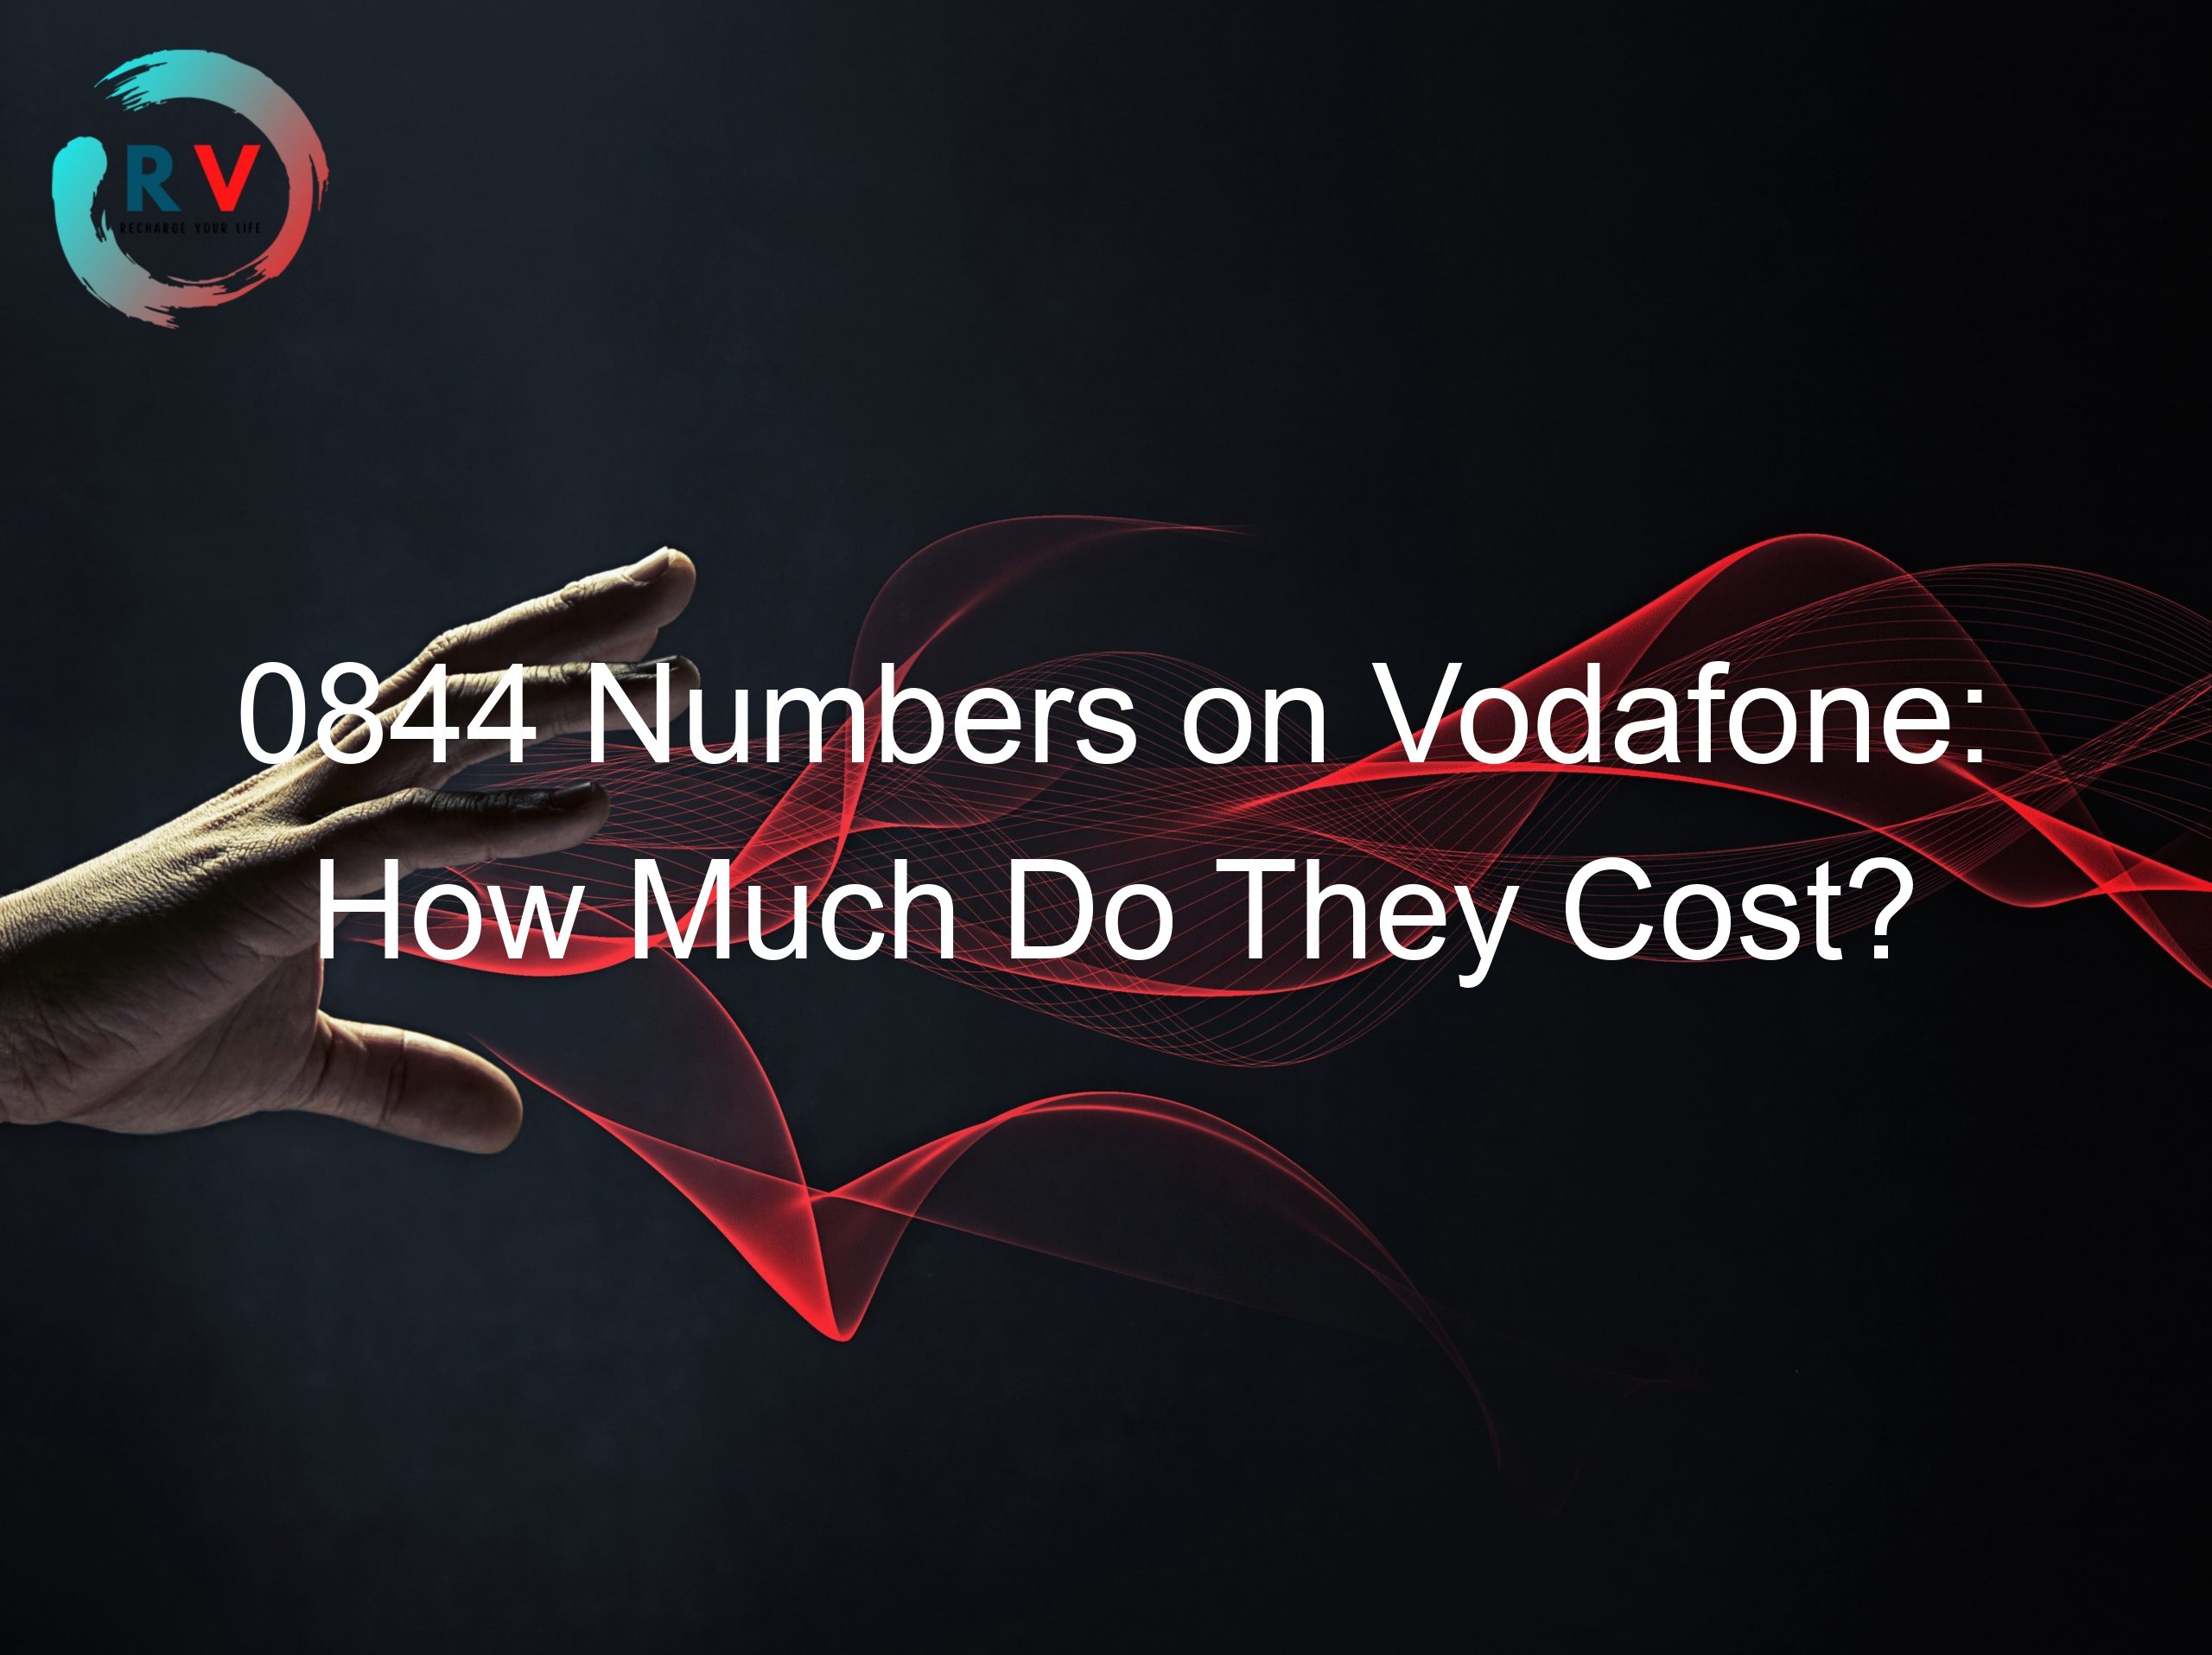 0844 Numbers on Vodafone: How Much Do They Cost?